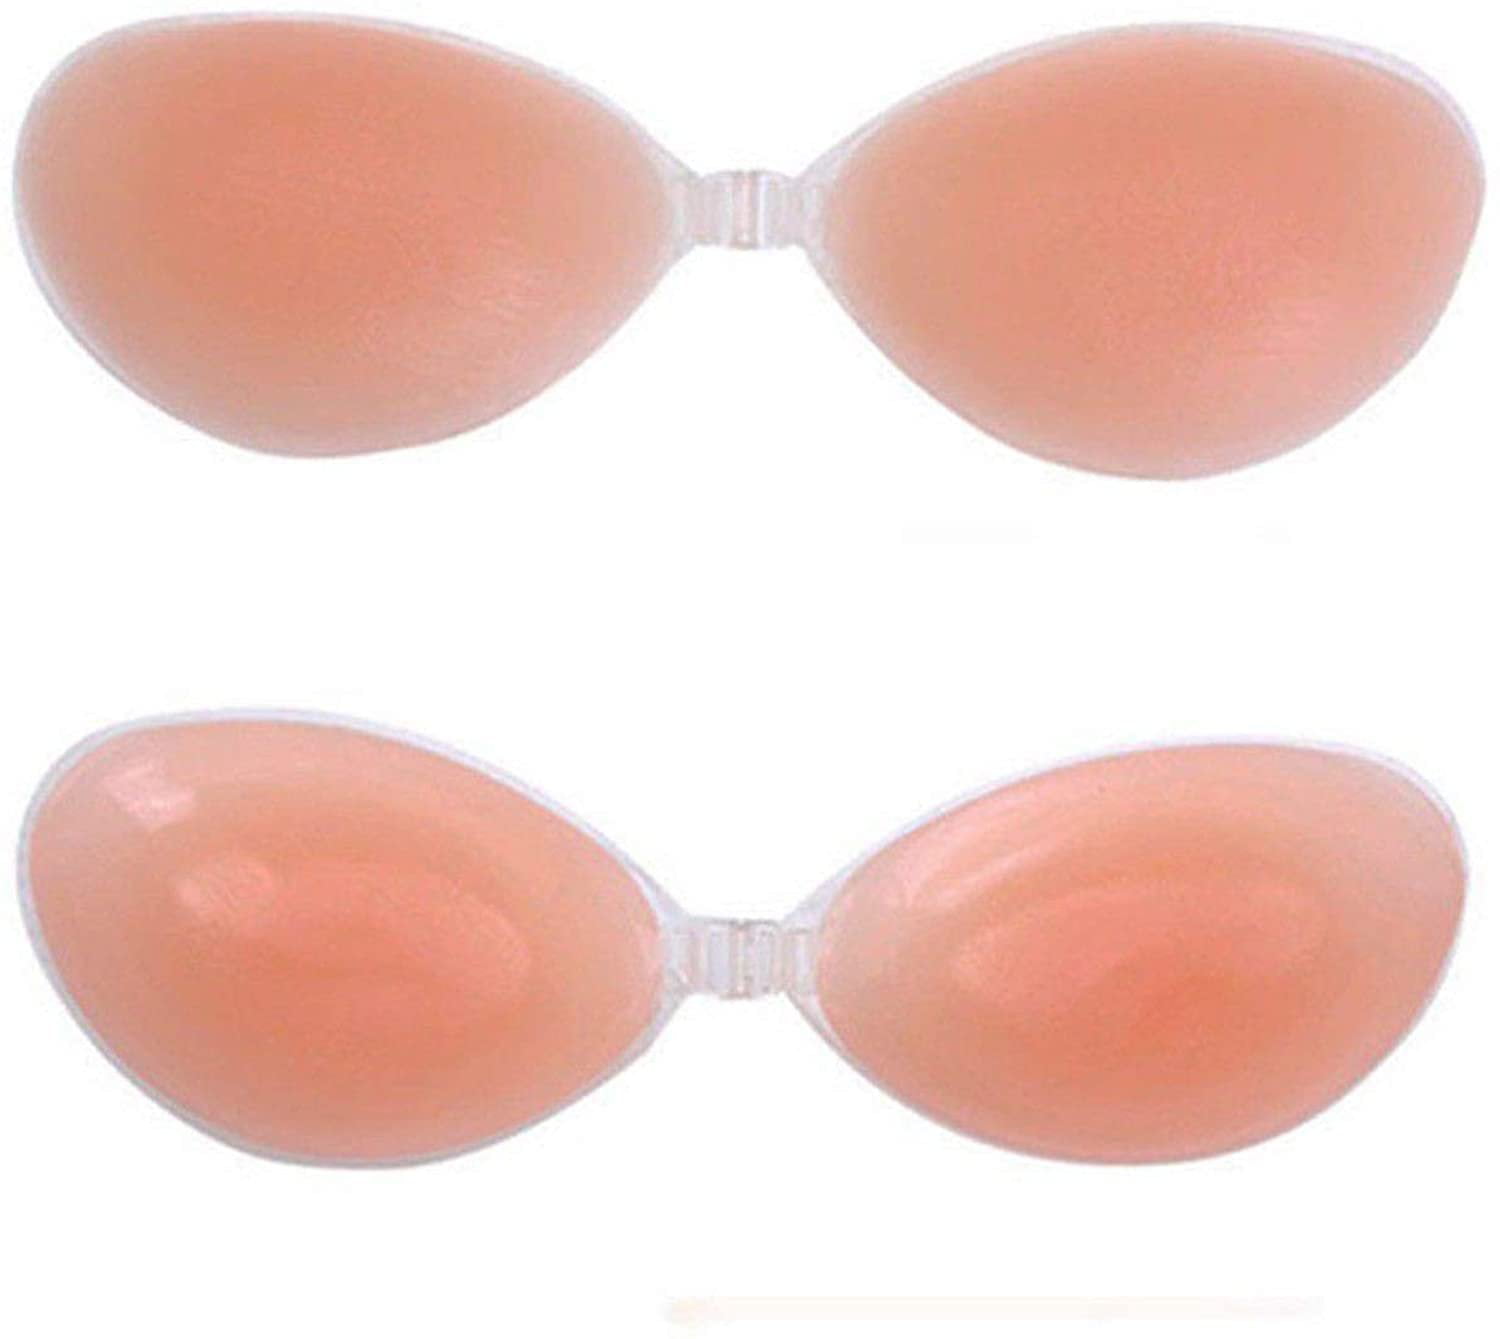 Iheyi Sticky Strapless Silicone Bra Self Adhesive Reusable Backless Bra Invisible Bras D Cup 